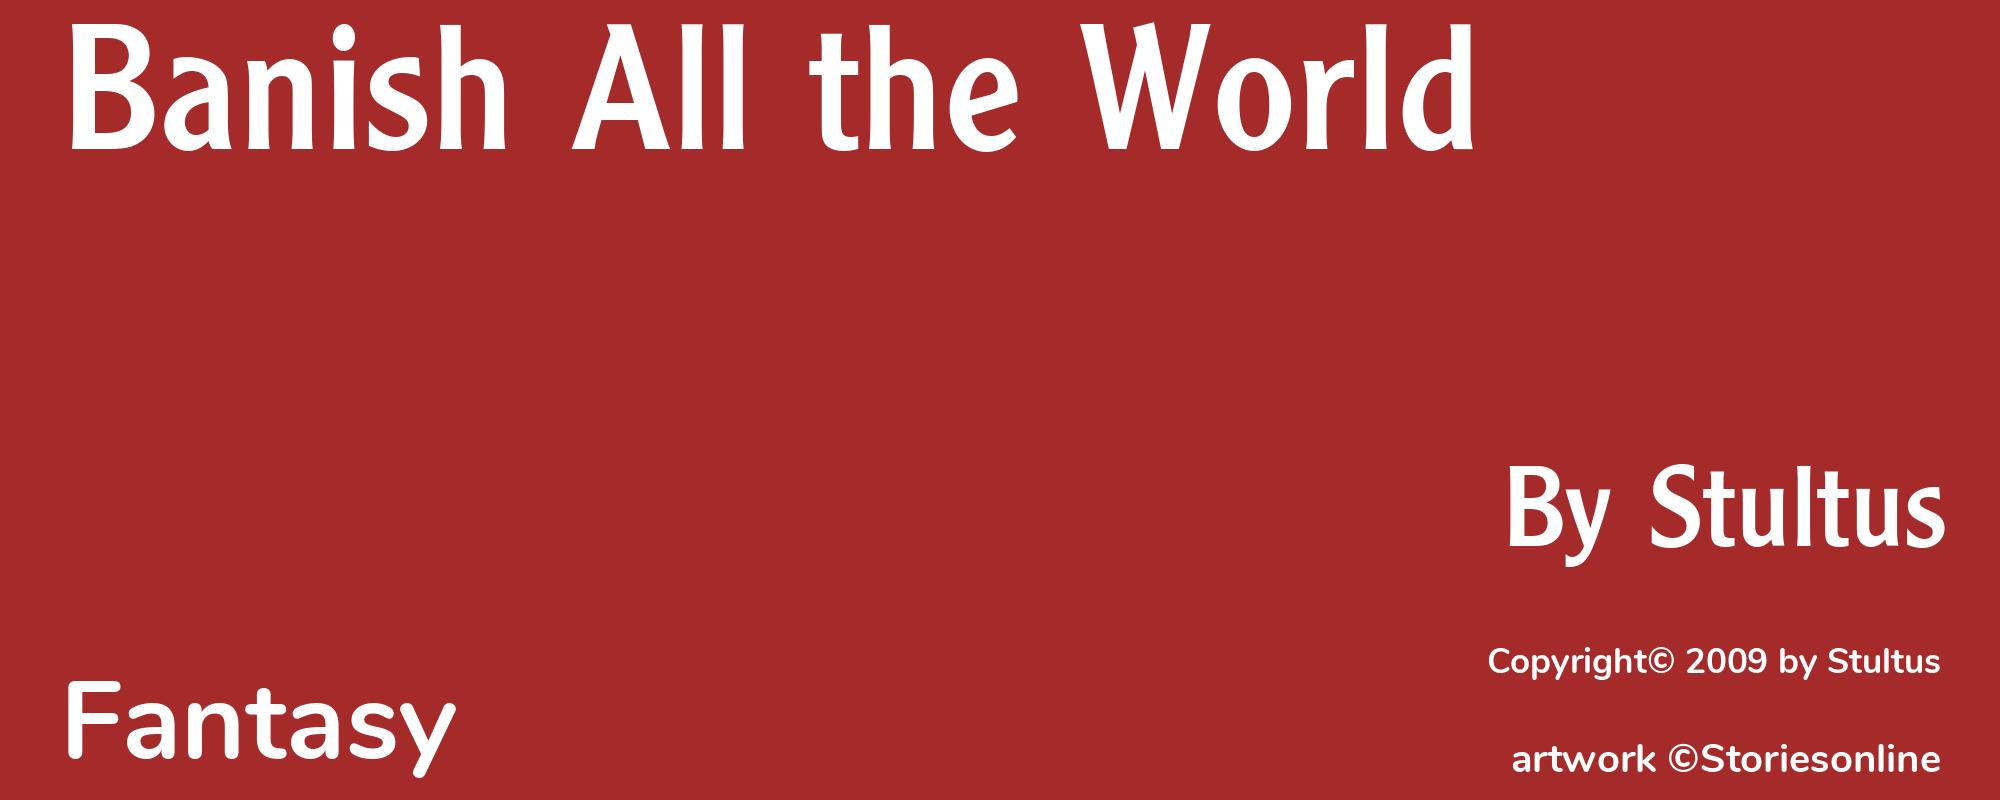 Banish All the World - Cover